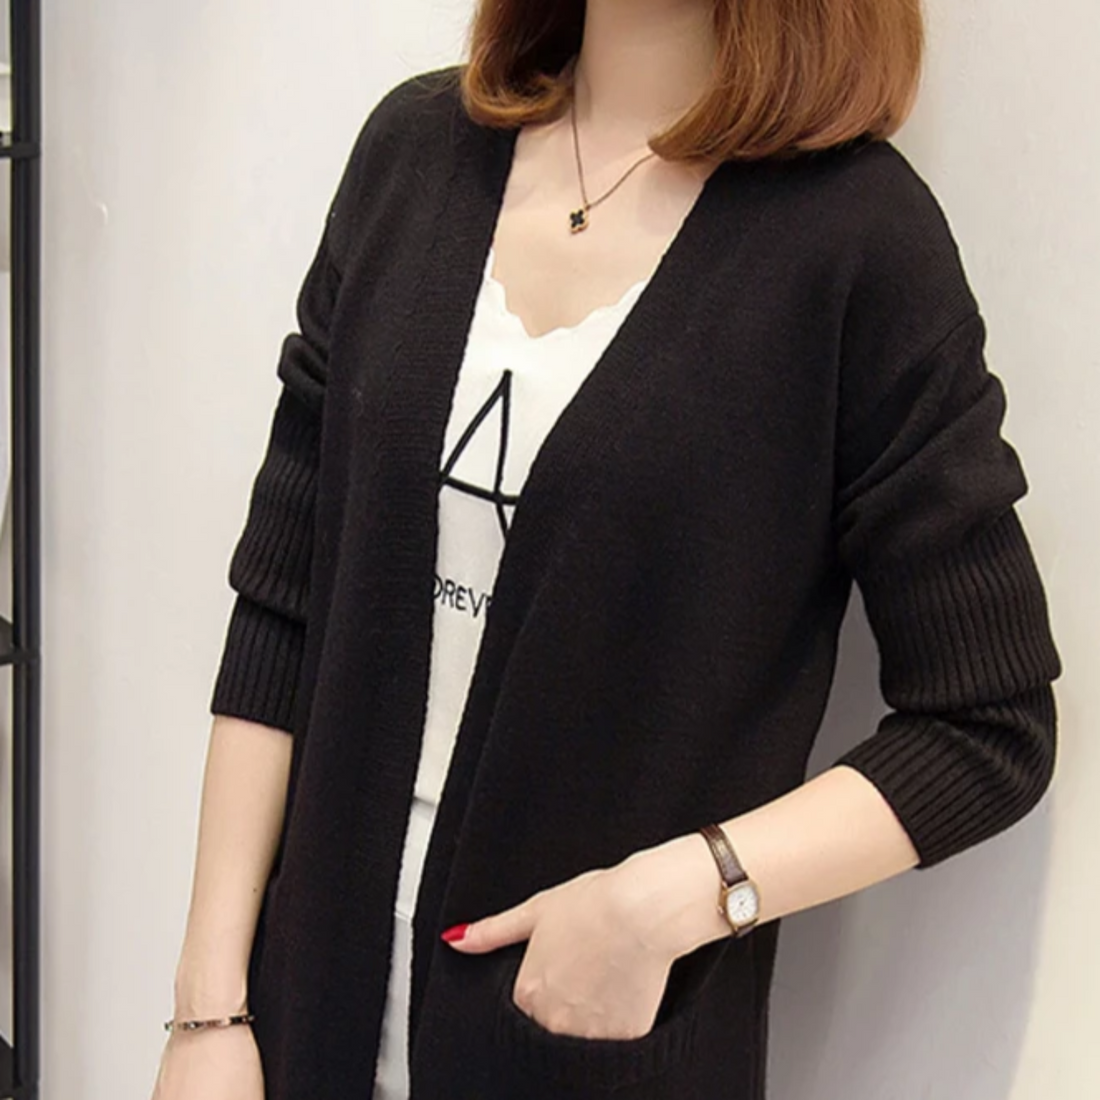 Women's Winter Casual Knitted Long-Sleeved V-Neck Cardigan